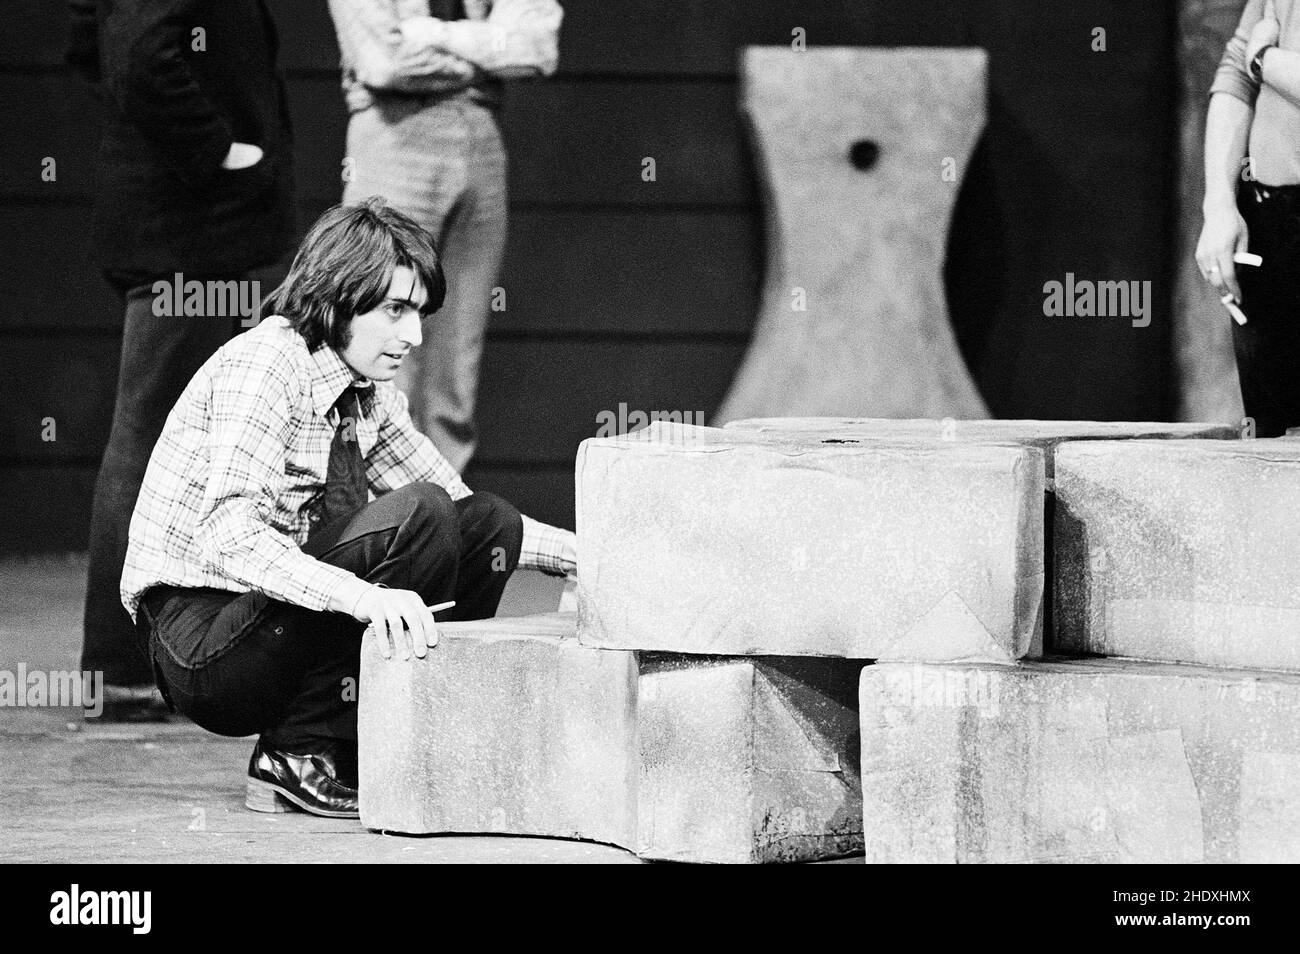 Bill Bryden on the set during a press photocall for his play WILLIE ROUGH at the Shaw Theatre, London NW1 on 16/01/1973 Stock Photo